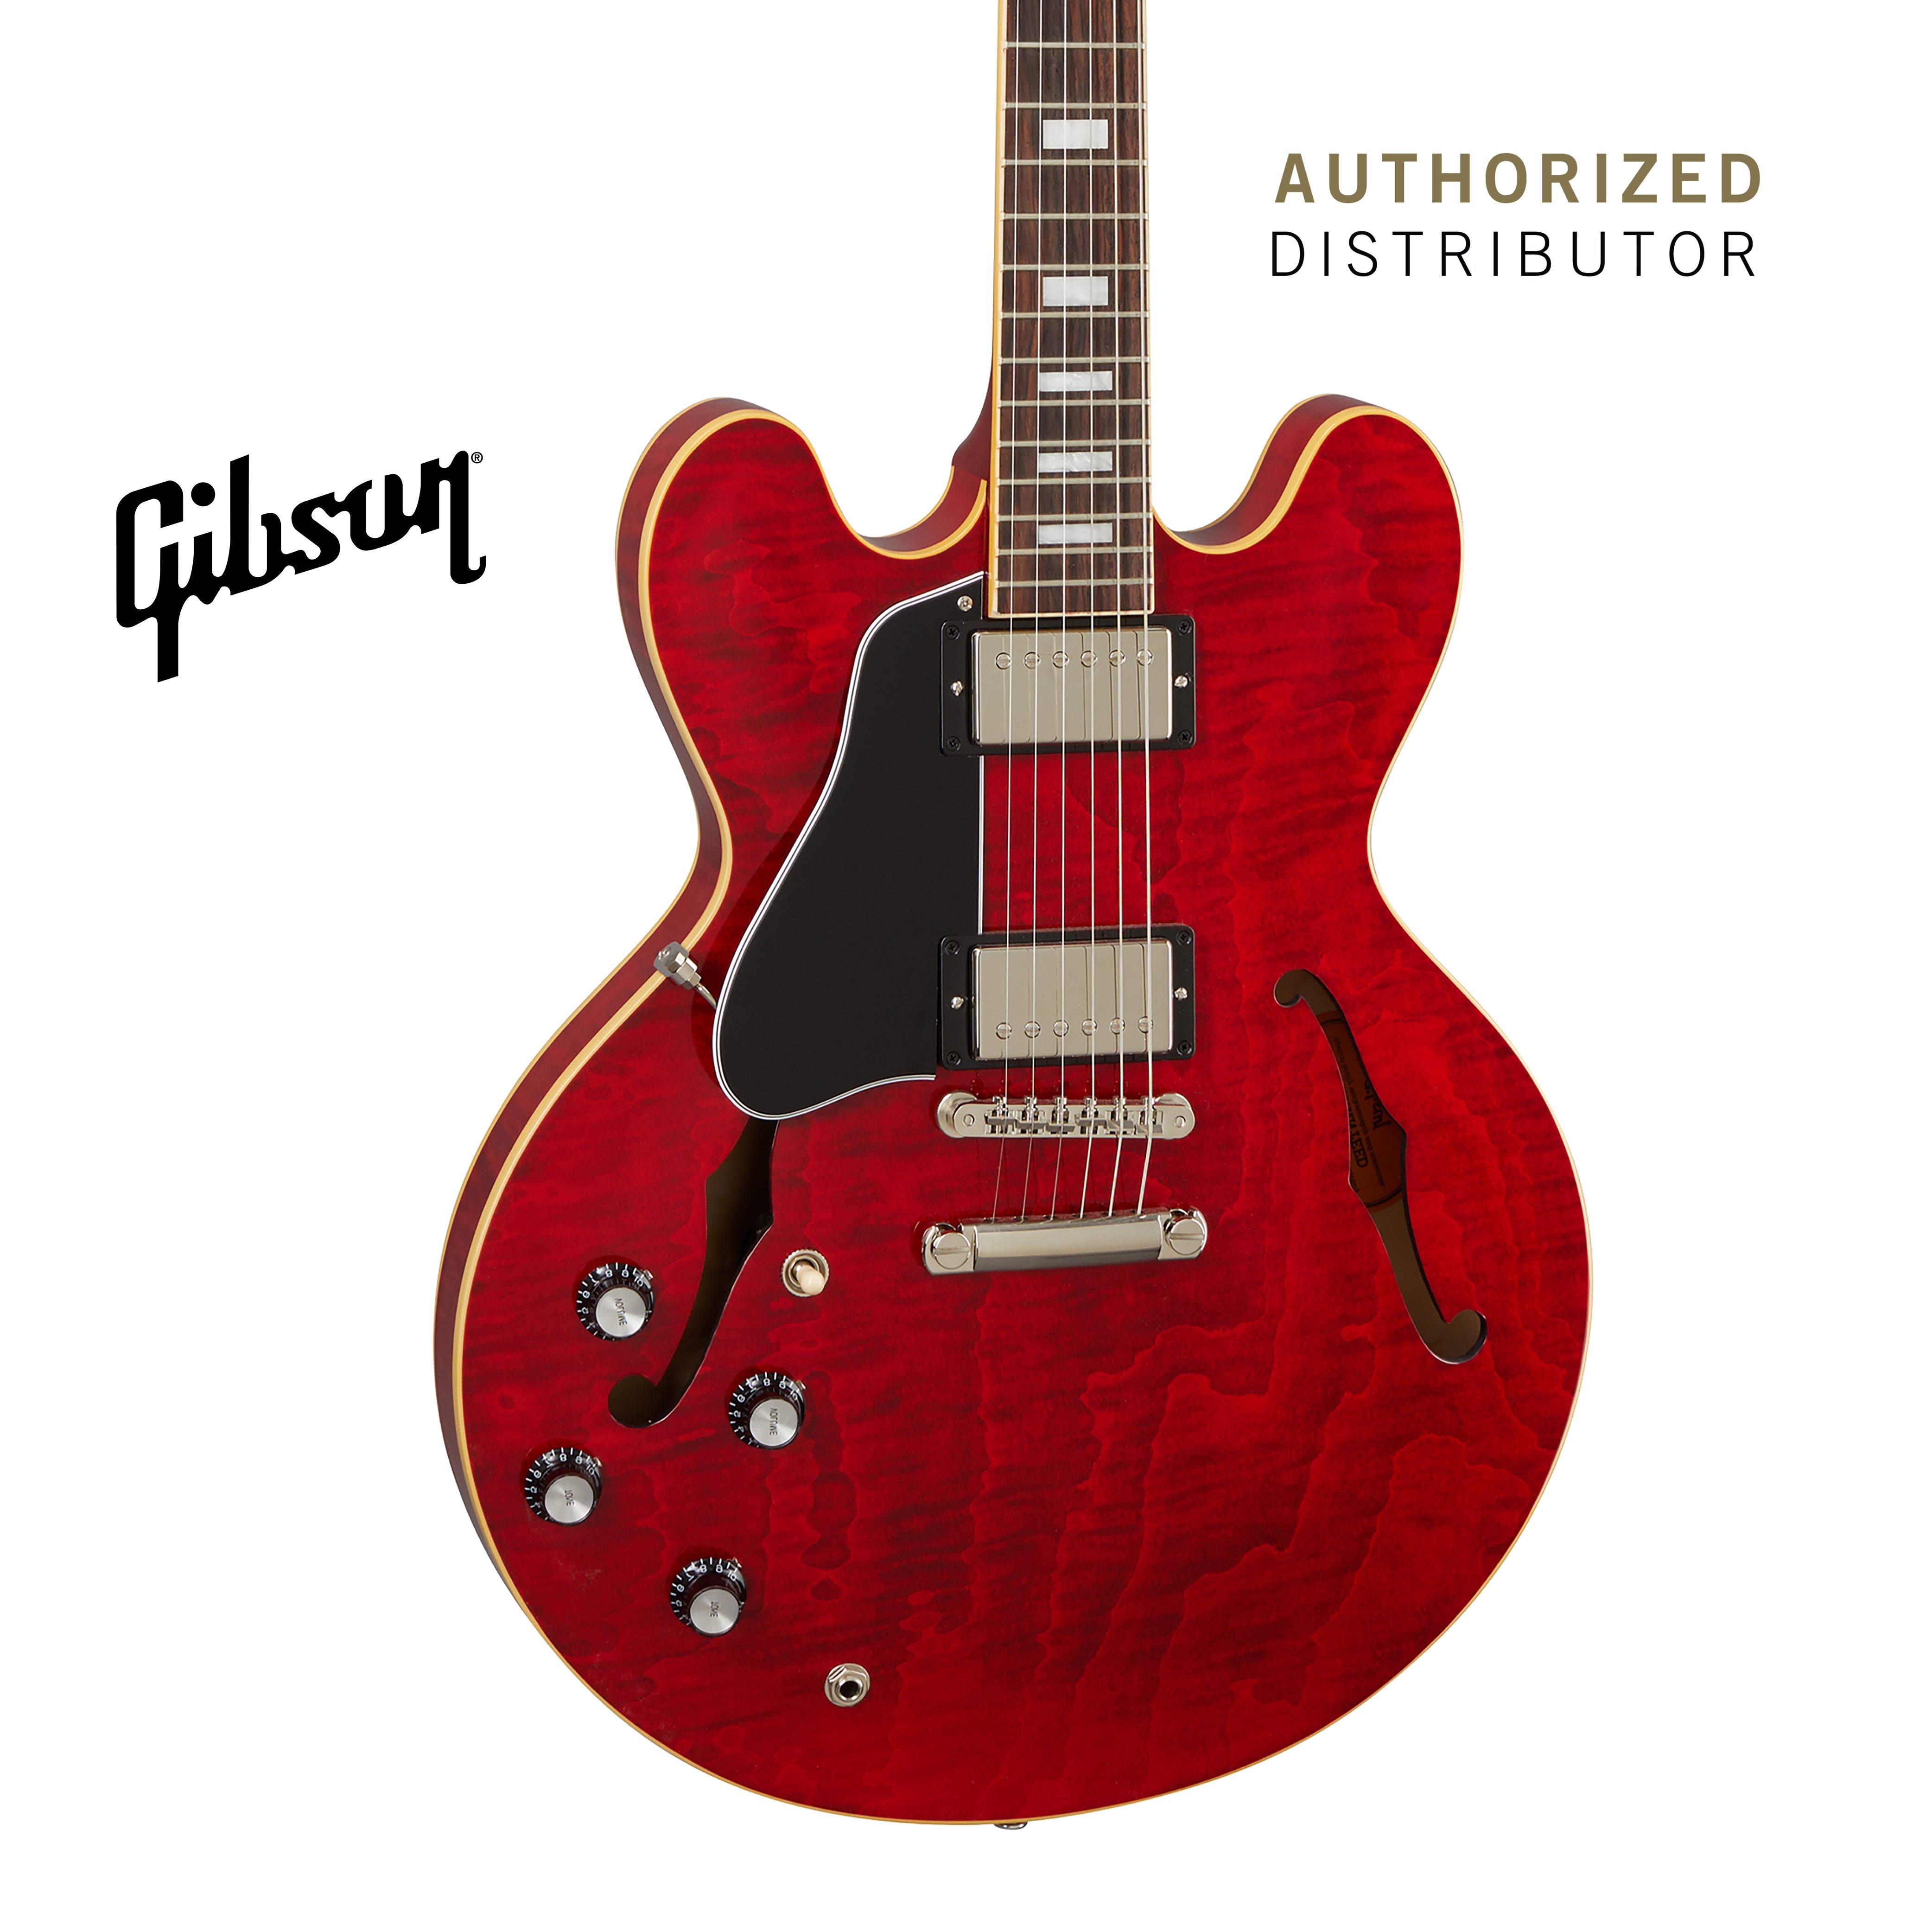 GIBSON ES-335 FIGURED LEFT-HANDED SEMI-HOLLOWBODY ELECTRIC GUITAR - 60S CHERRY